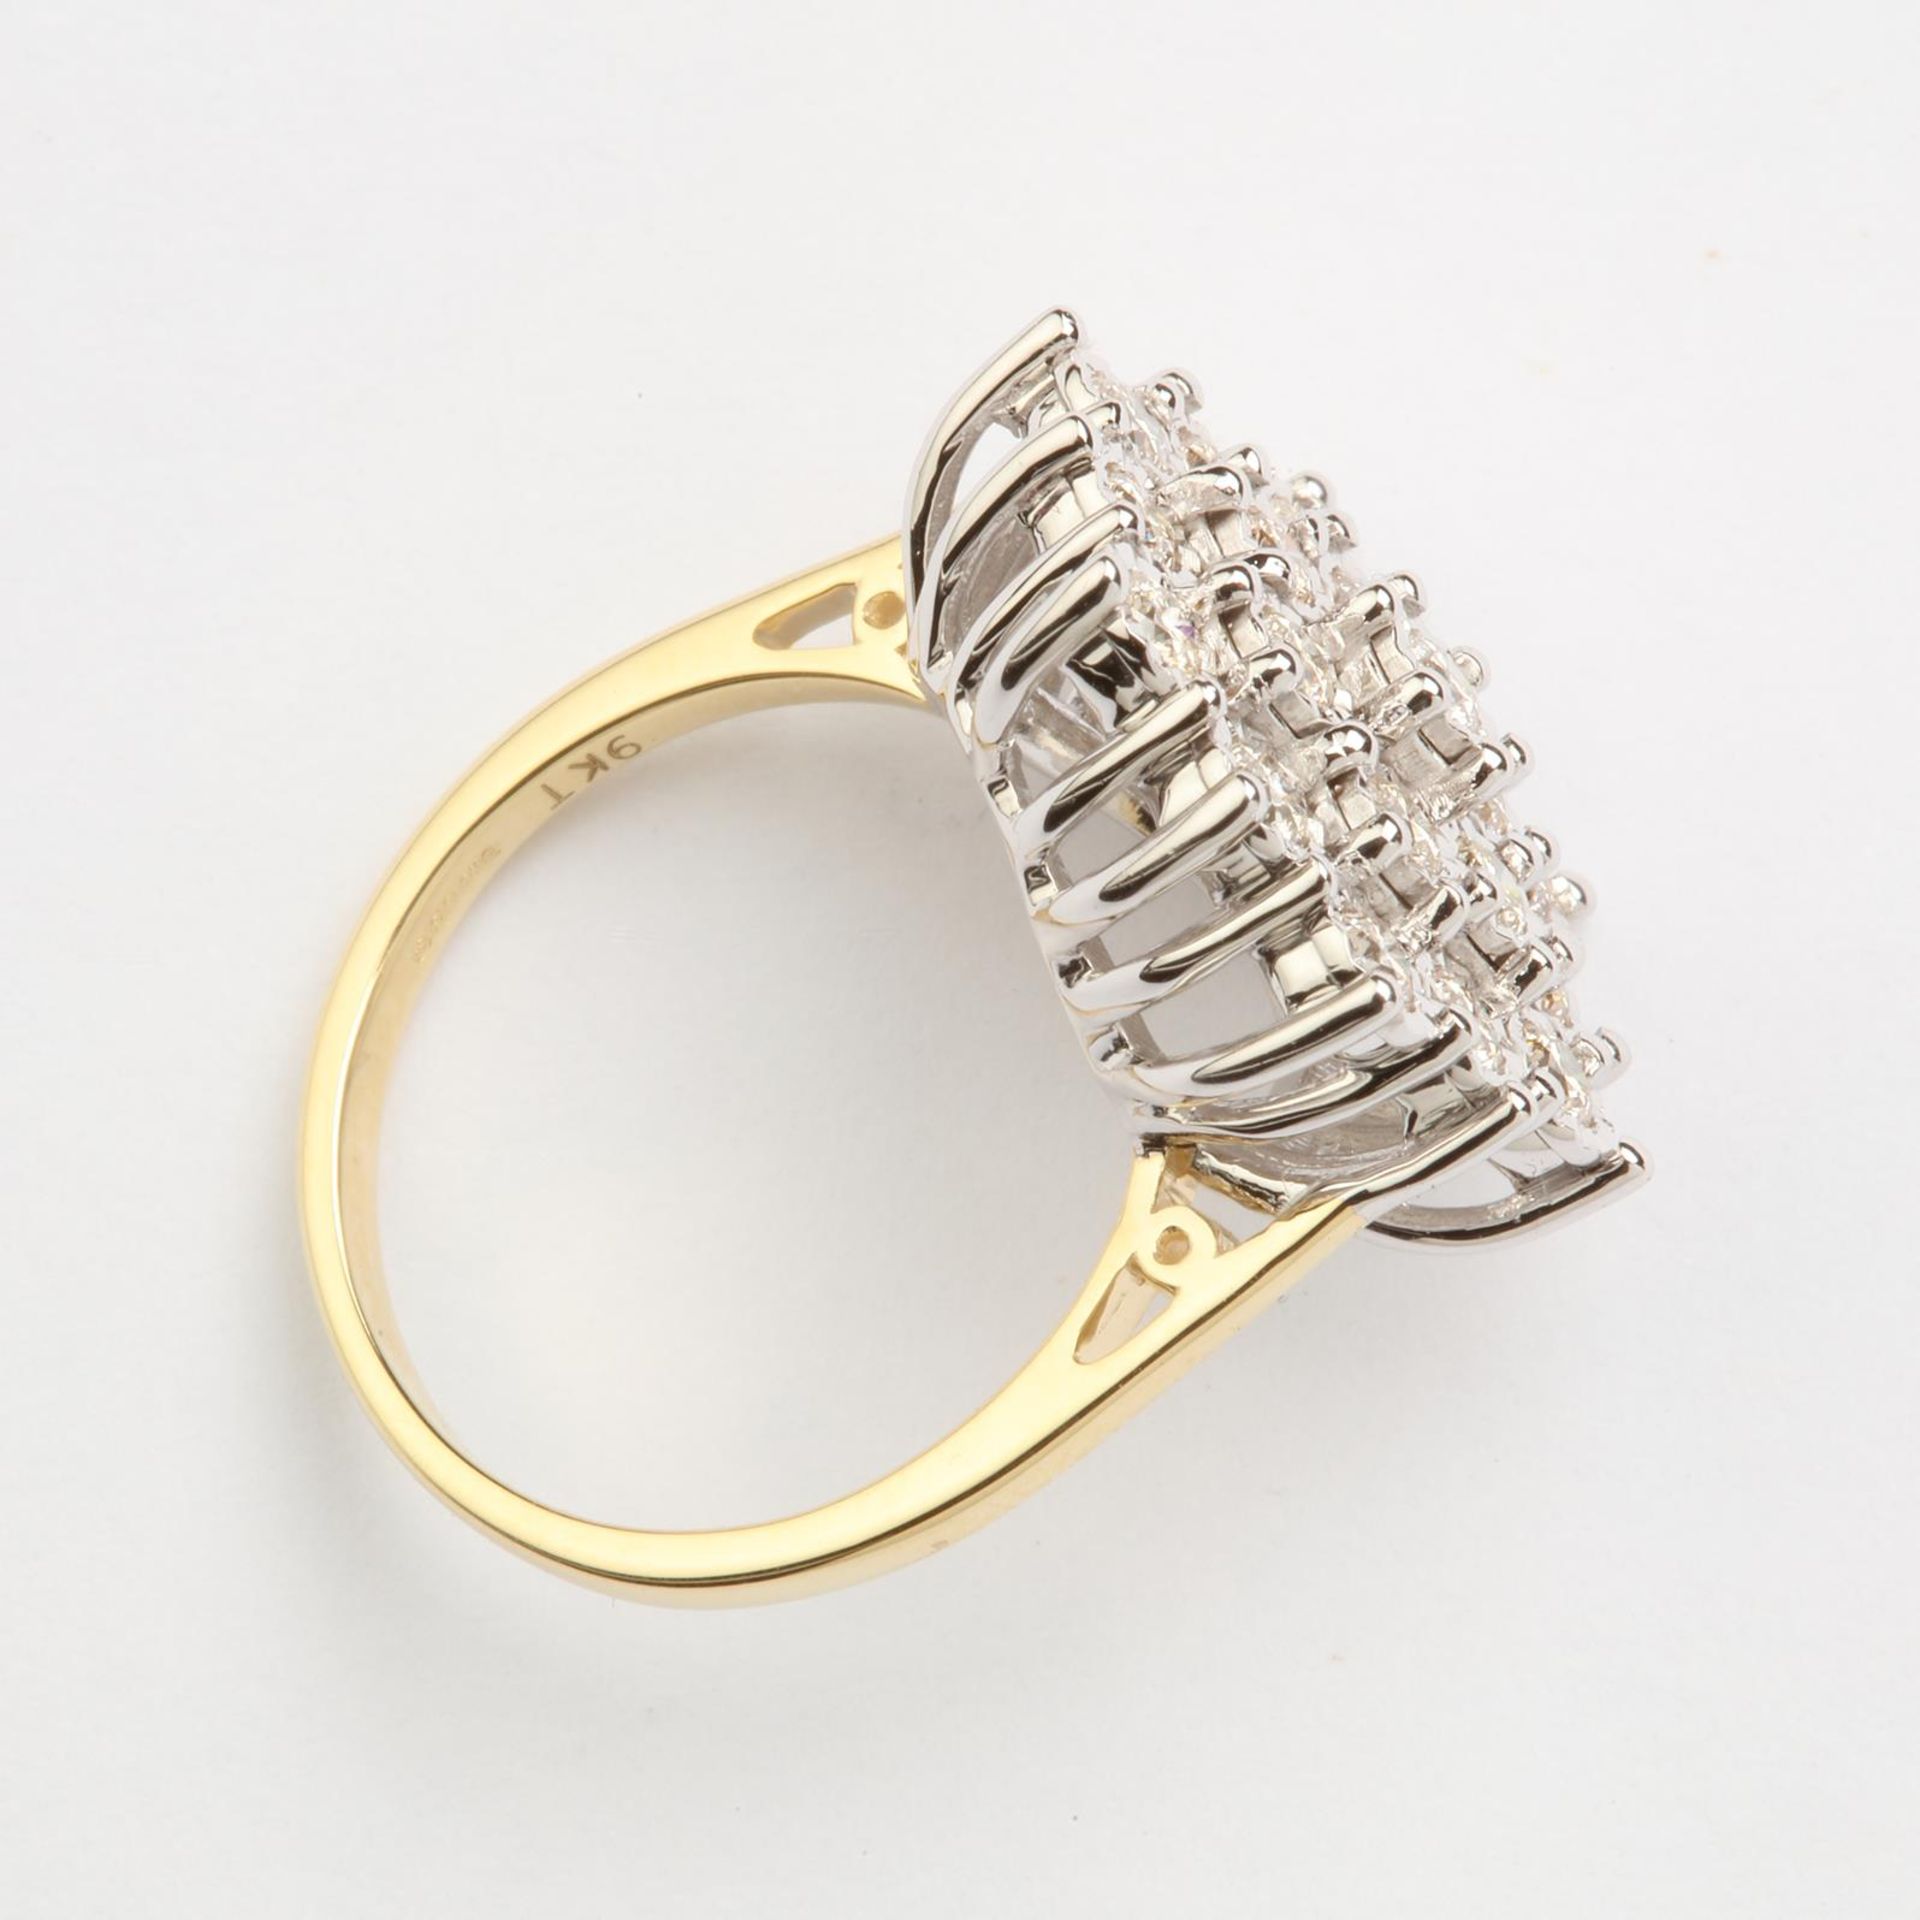 + VAT Ladies Gold 1ct Diamond Cluster Ring With 19 Diamonds Set In White Gold Mount - Image 3 of 3